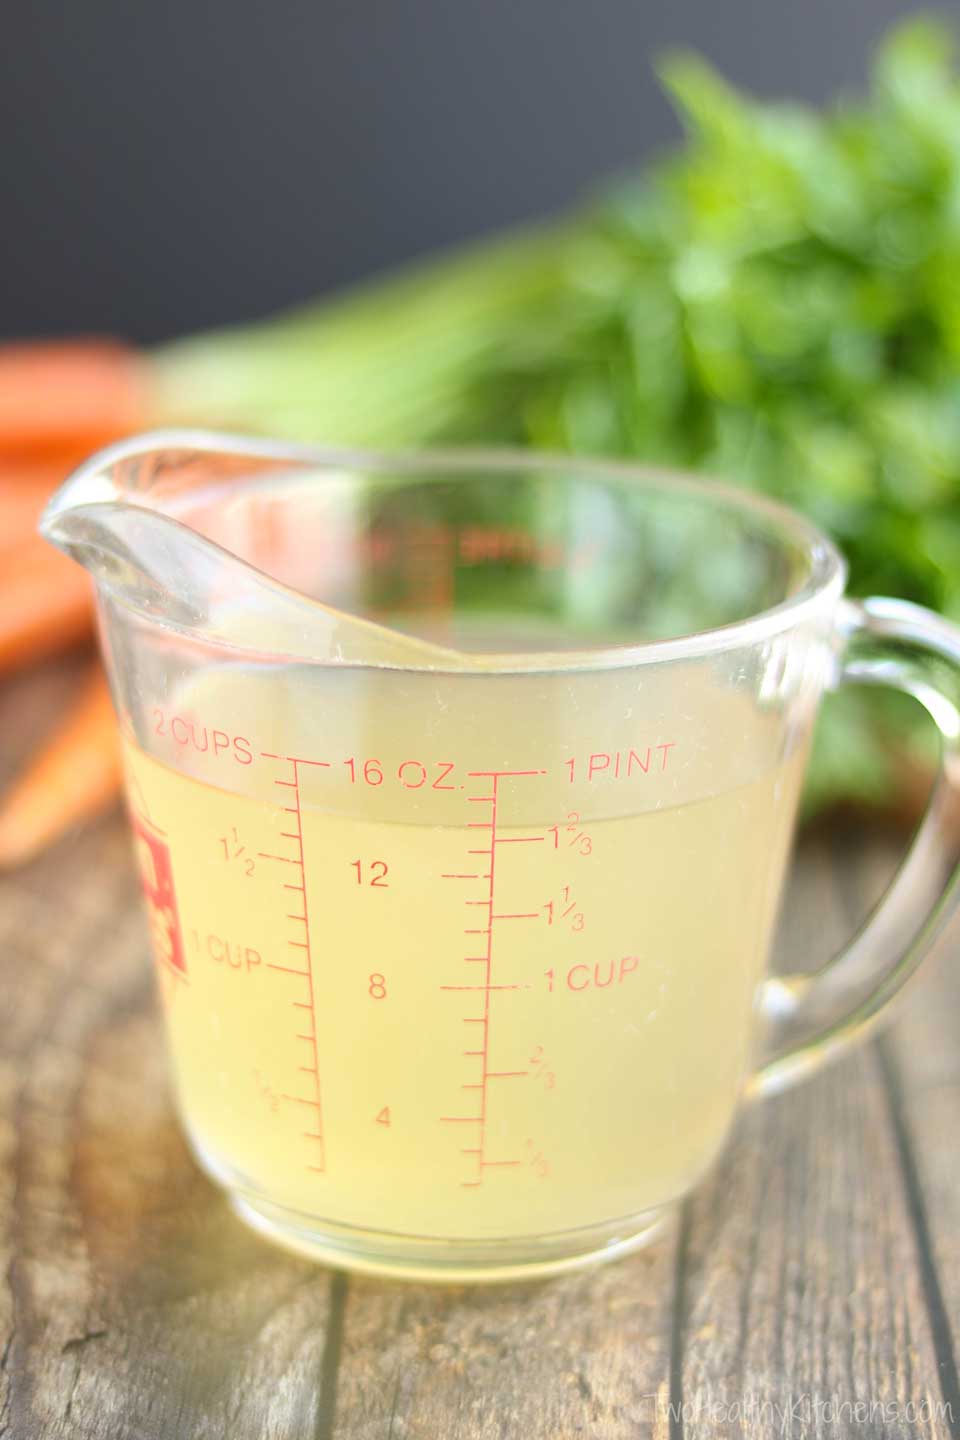 Lots of people might wonder, “Should I use low sodium broth instead of regular broth in a recipe?” There are several reasons why we almost always choose lower sodium chicken broth!